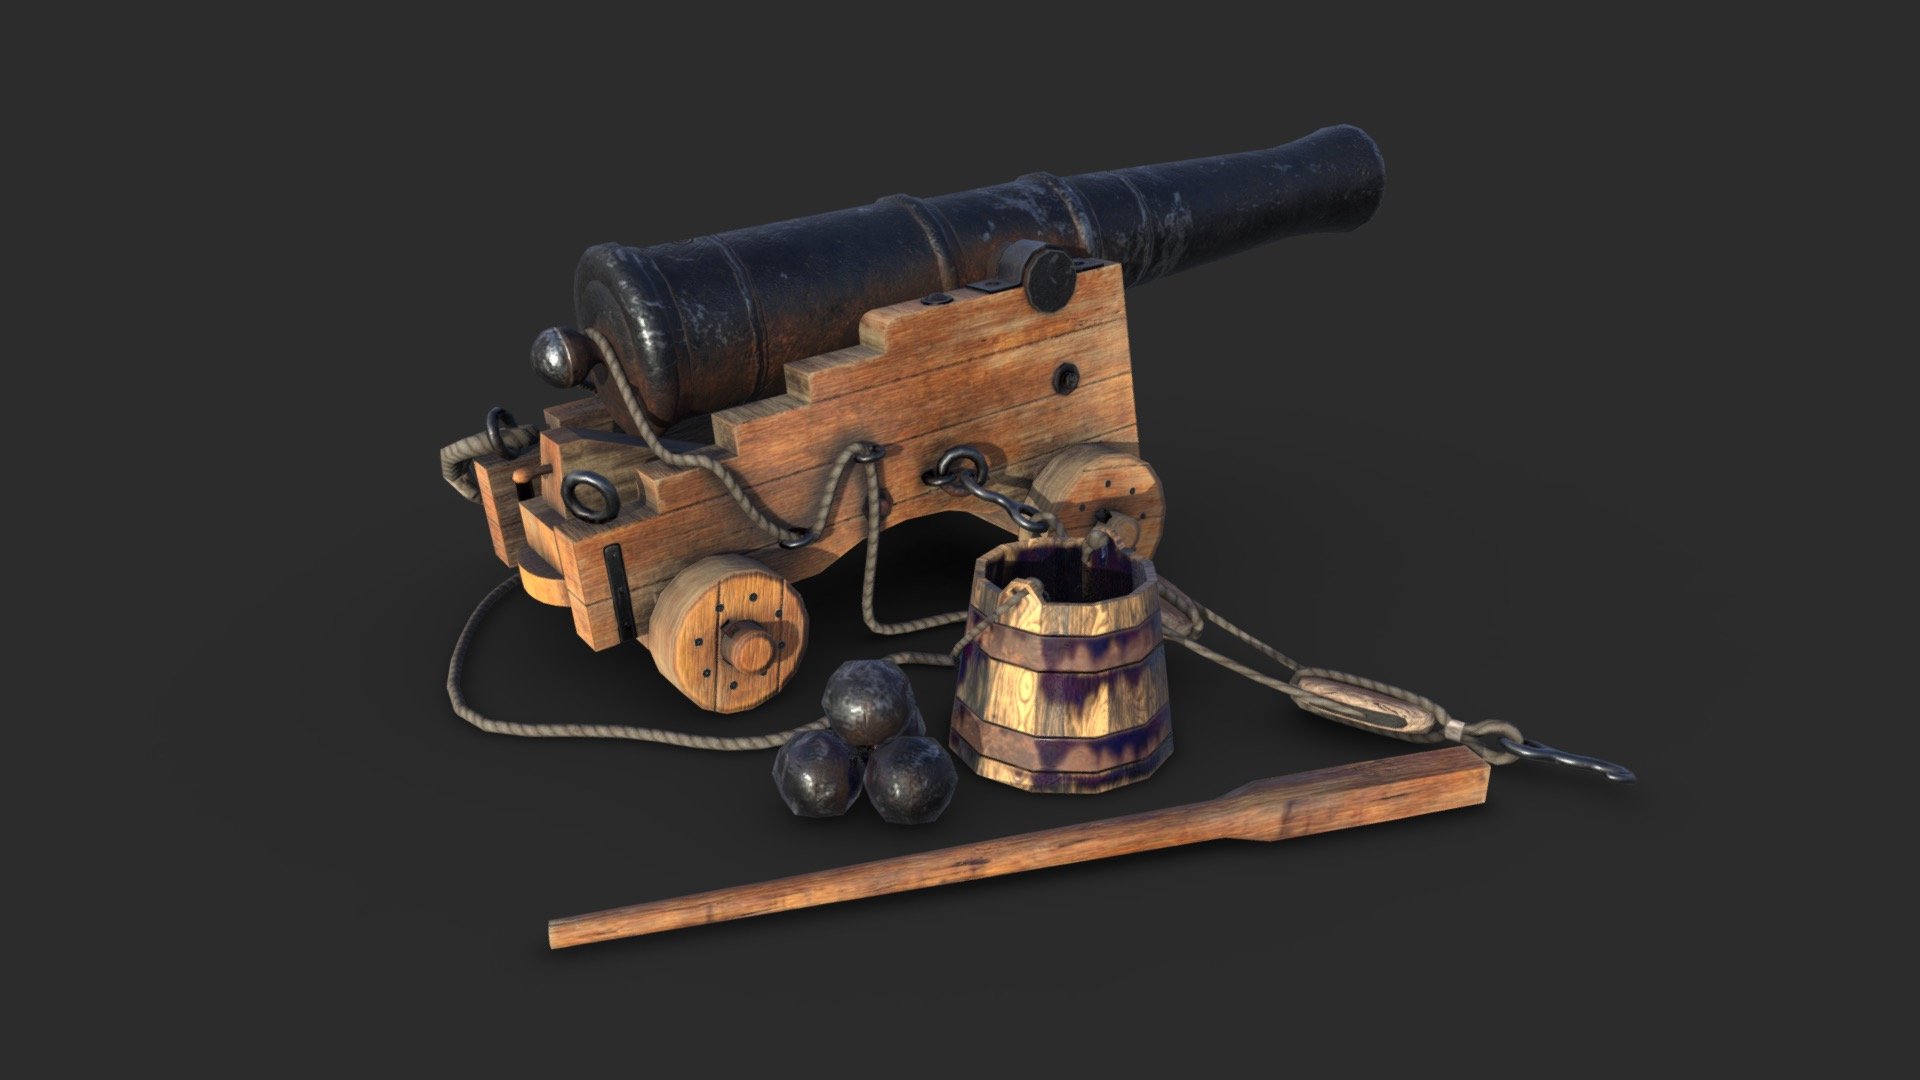 This vintage 36 pounder naval cannon assets pack including 4 individual objects with 3 LODs and collision boxes and 3 color variants to get the best optimization and the best quality for the most popular game engines. All elements can easily be positioned together to create a more detailed scene. 

This AAA game asset of old bulk bags will embellish you scene and add more details which can help the gameplay and the game-design.

Low-poly model &amp; Blender native 2.90

SPECIFICATIONS




Objects : 4

Polygons : 5148

Subdivision ready : Yes

Render engine : Eevee (Cycles ready)

GAME SPECS




LODs : Yes (inside FBX for Unity &amp; Unreal)

Numbers of LODs : 3

Collider : Yes

Lightmap UV : No

EXPORTED FORMATS




FBX

Collada

OBJ

TEXTURES




Materials in scene : 1

Textures sizes : 4K

Textures types : Base Color, Metallic, Roughness, Normal (DirectX &amp; OpenGL), Heigh &amp; AO (also Unity &amp; Unreal workflow maps)

Textures format : PNG
 - Old Naval Cannon - Natural Wood - Buy Royalty Free 3D model by KangaroOz 3D (@KangaroOz-3D) 3d model